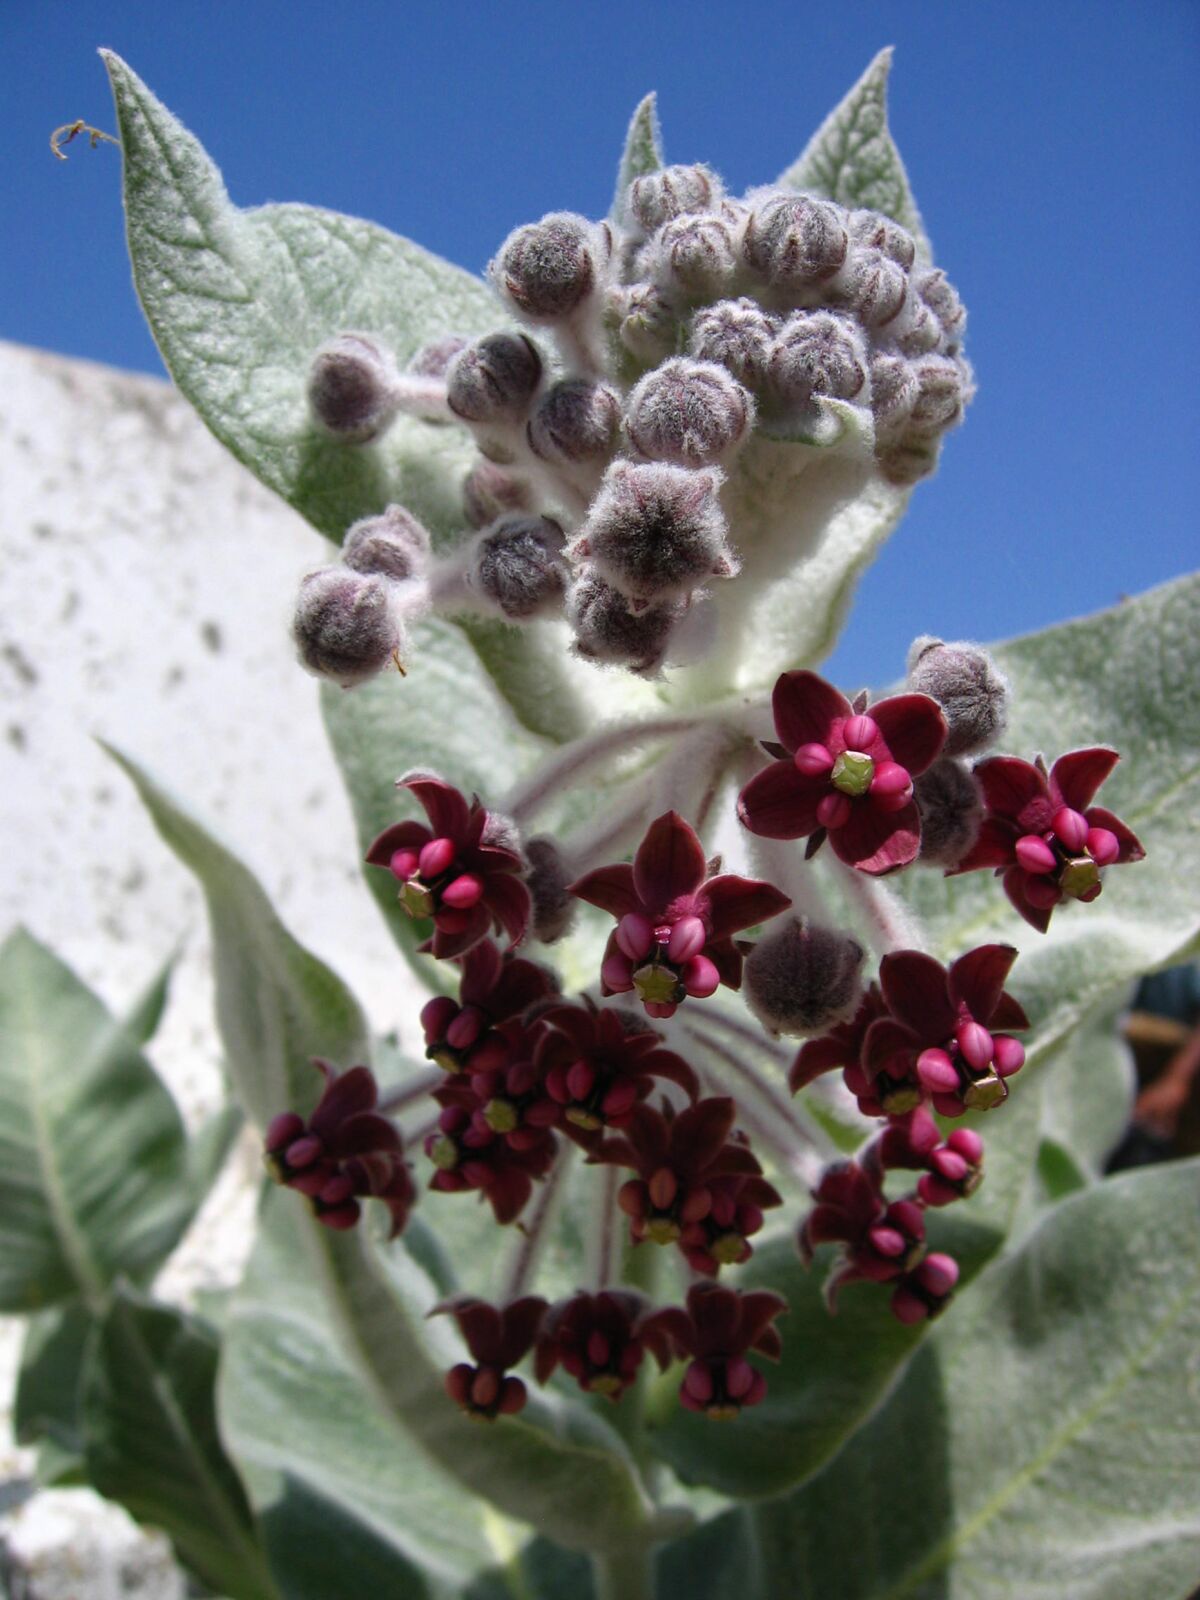 California milkweed (Asclepias californica) is another native variety that is recommended in Southern California.